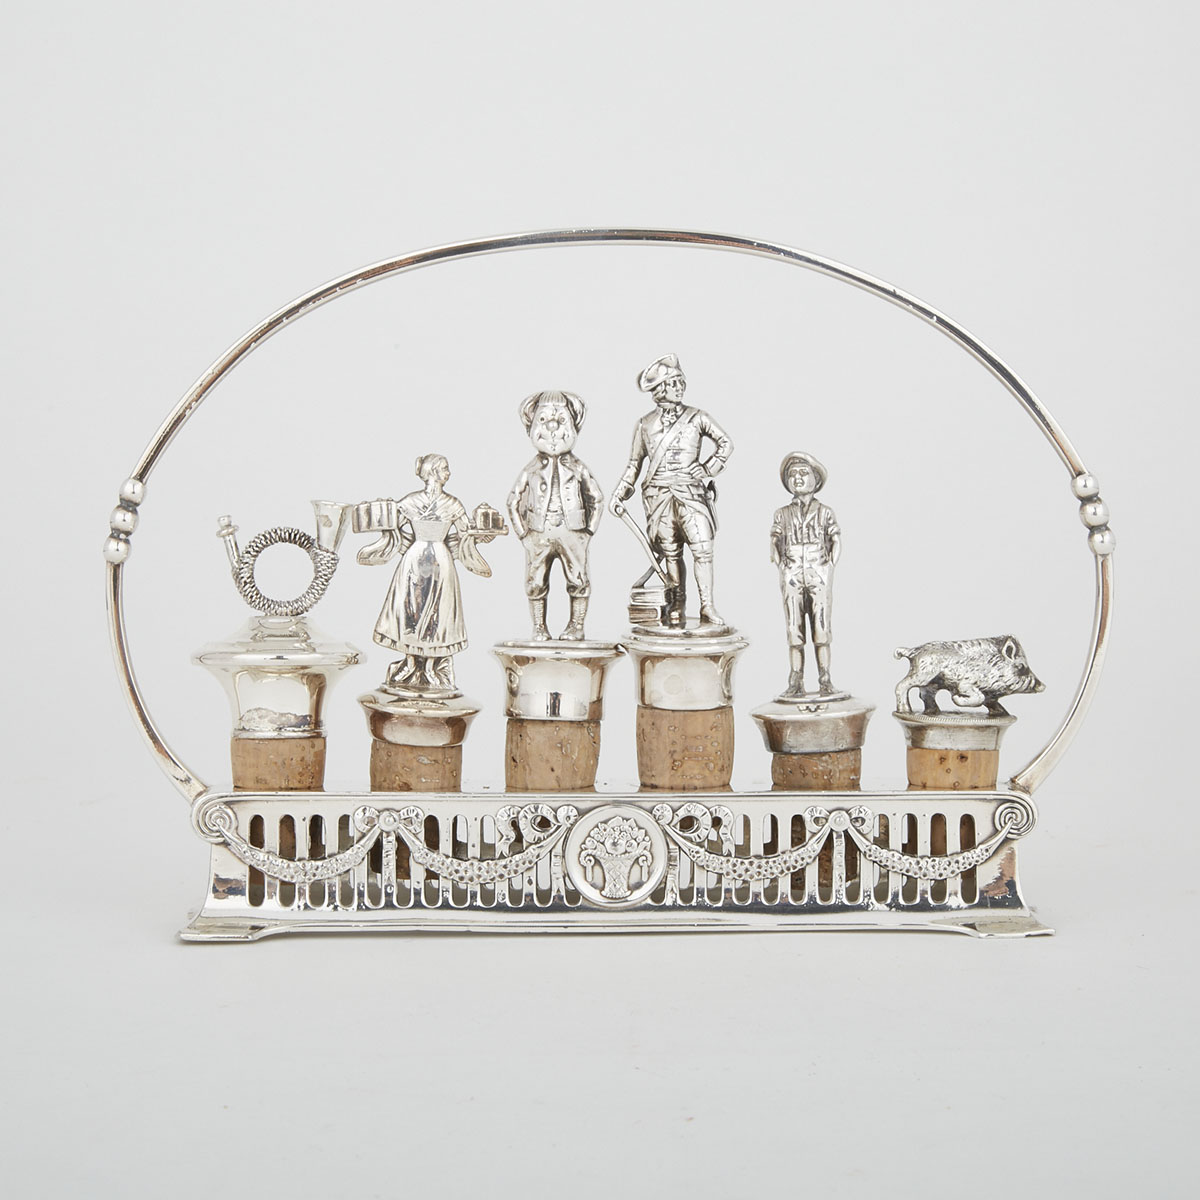 German WMF Silver Plated Novelty Stopper Caddy, early 20th century